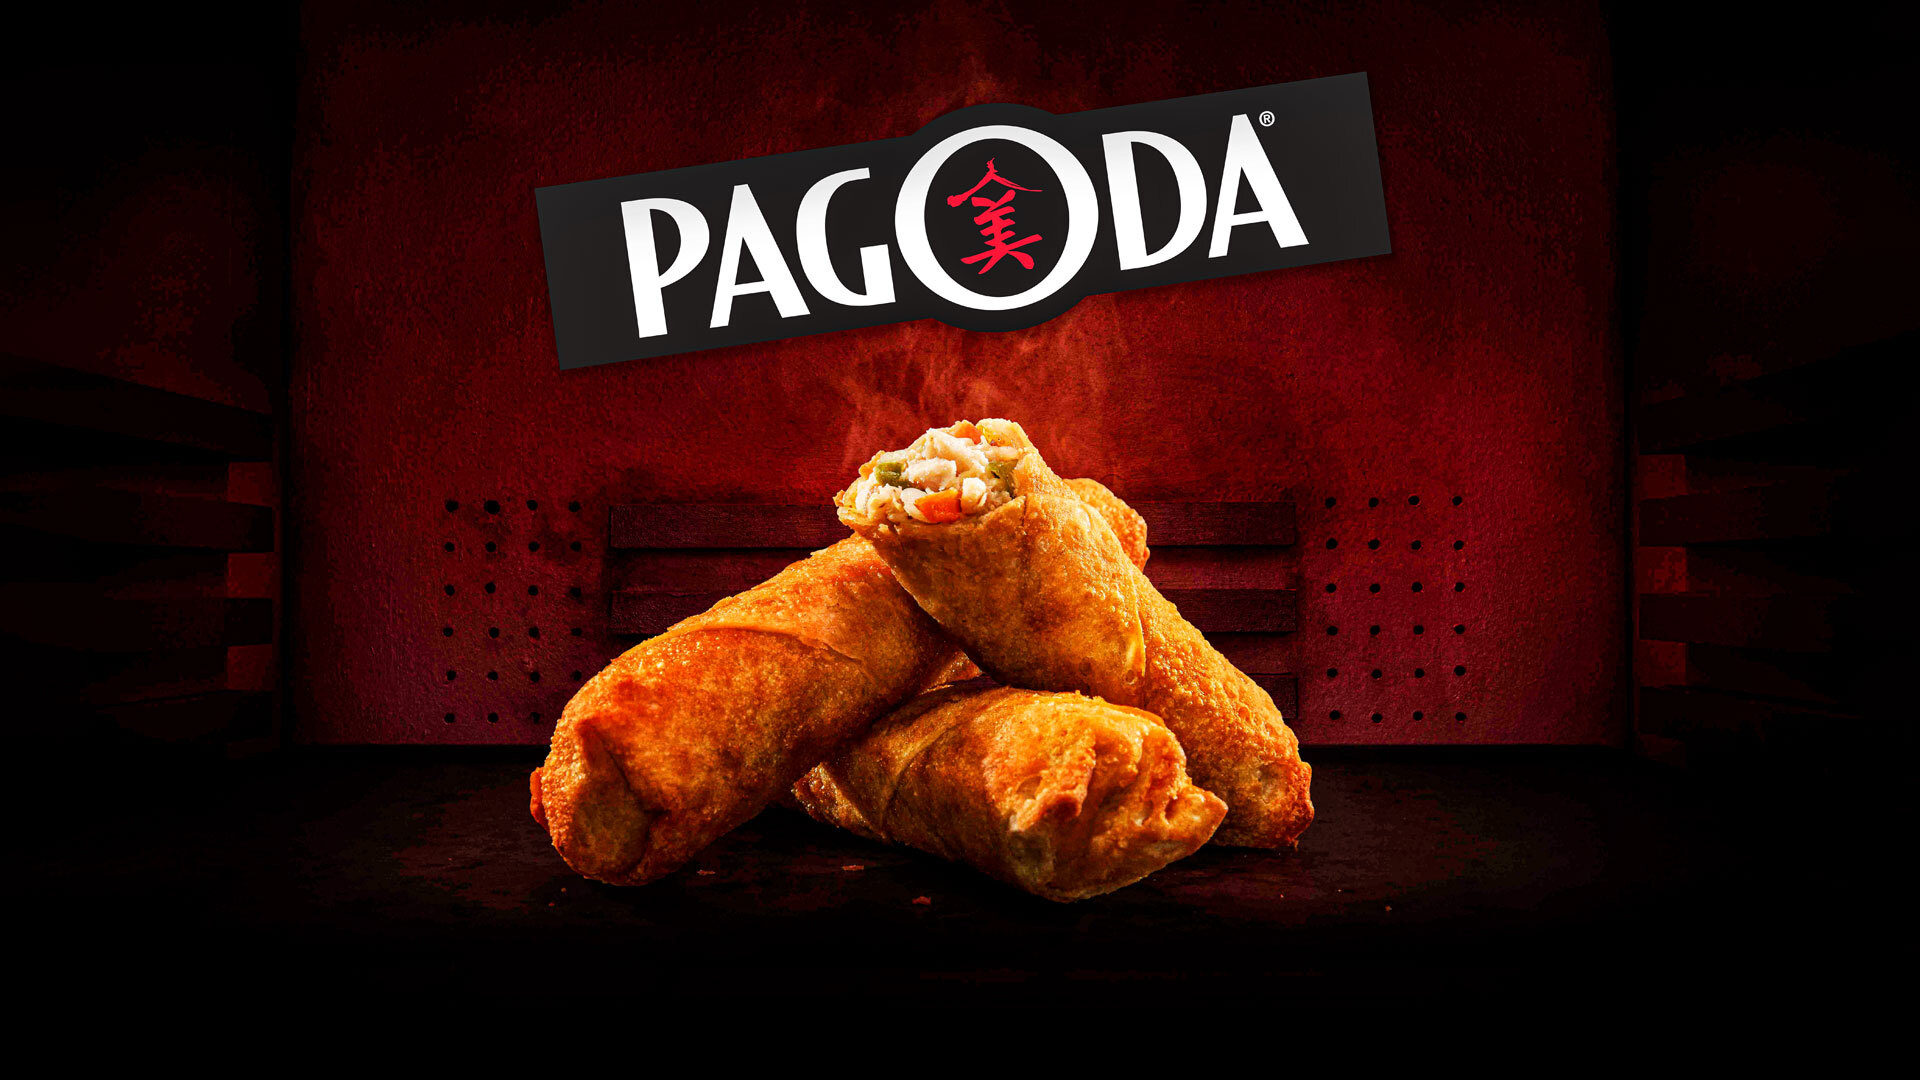 Version1 has announced a partnership with Pagoda Snacks. This is an image of Pagoda egg rolls underneath text that says "PAGODA"